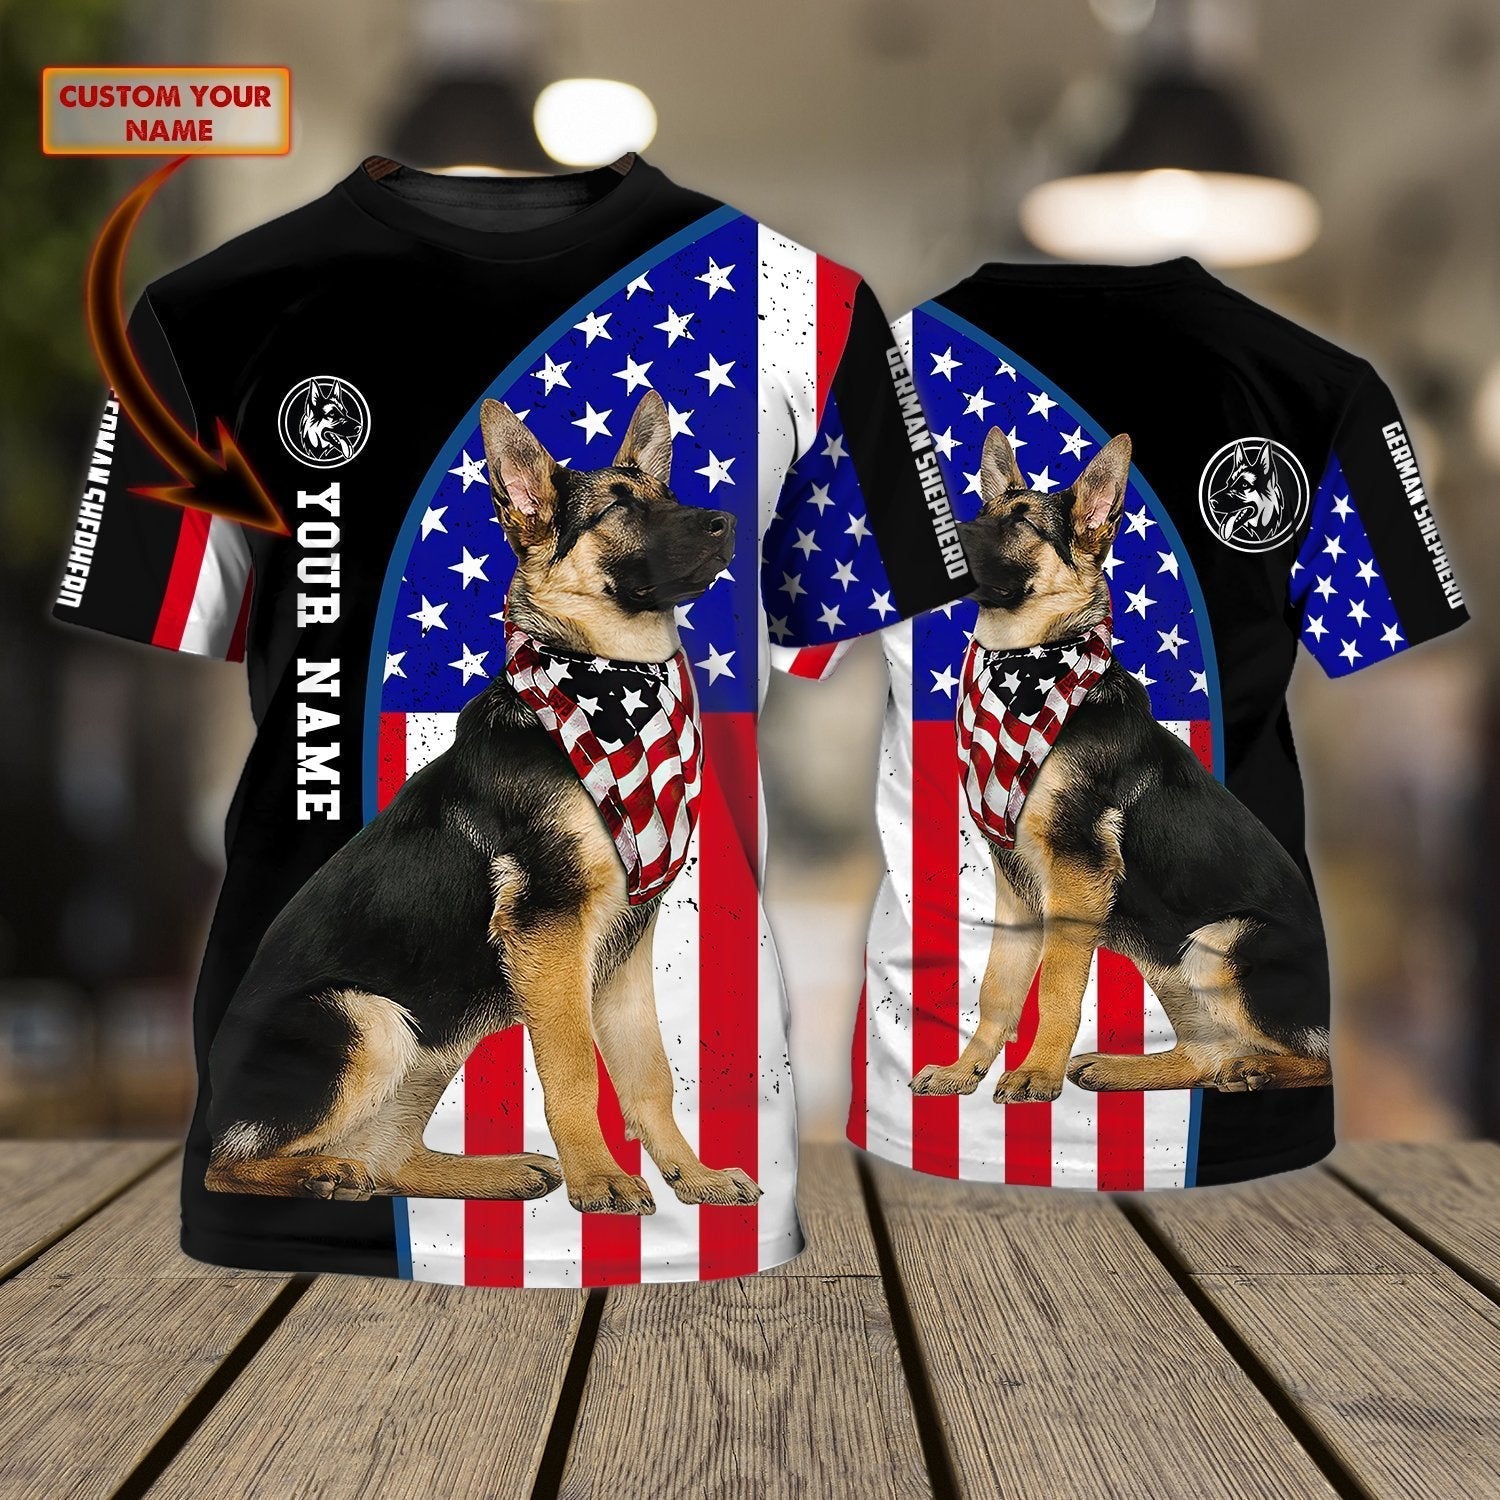 Personalized Name 3D T Shirt German Shepherd/ Cute Dog on Shirt For Him Her